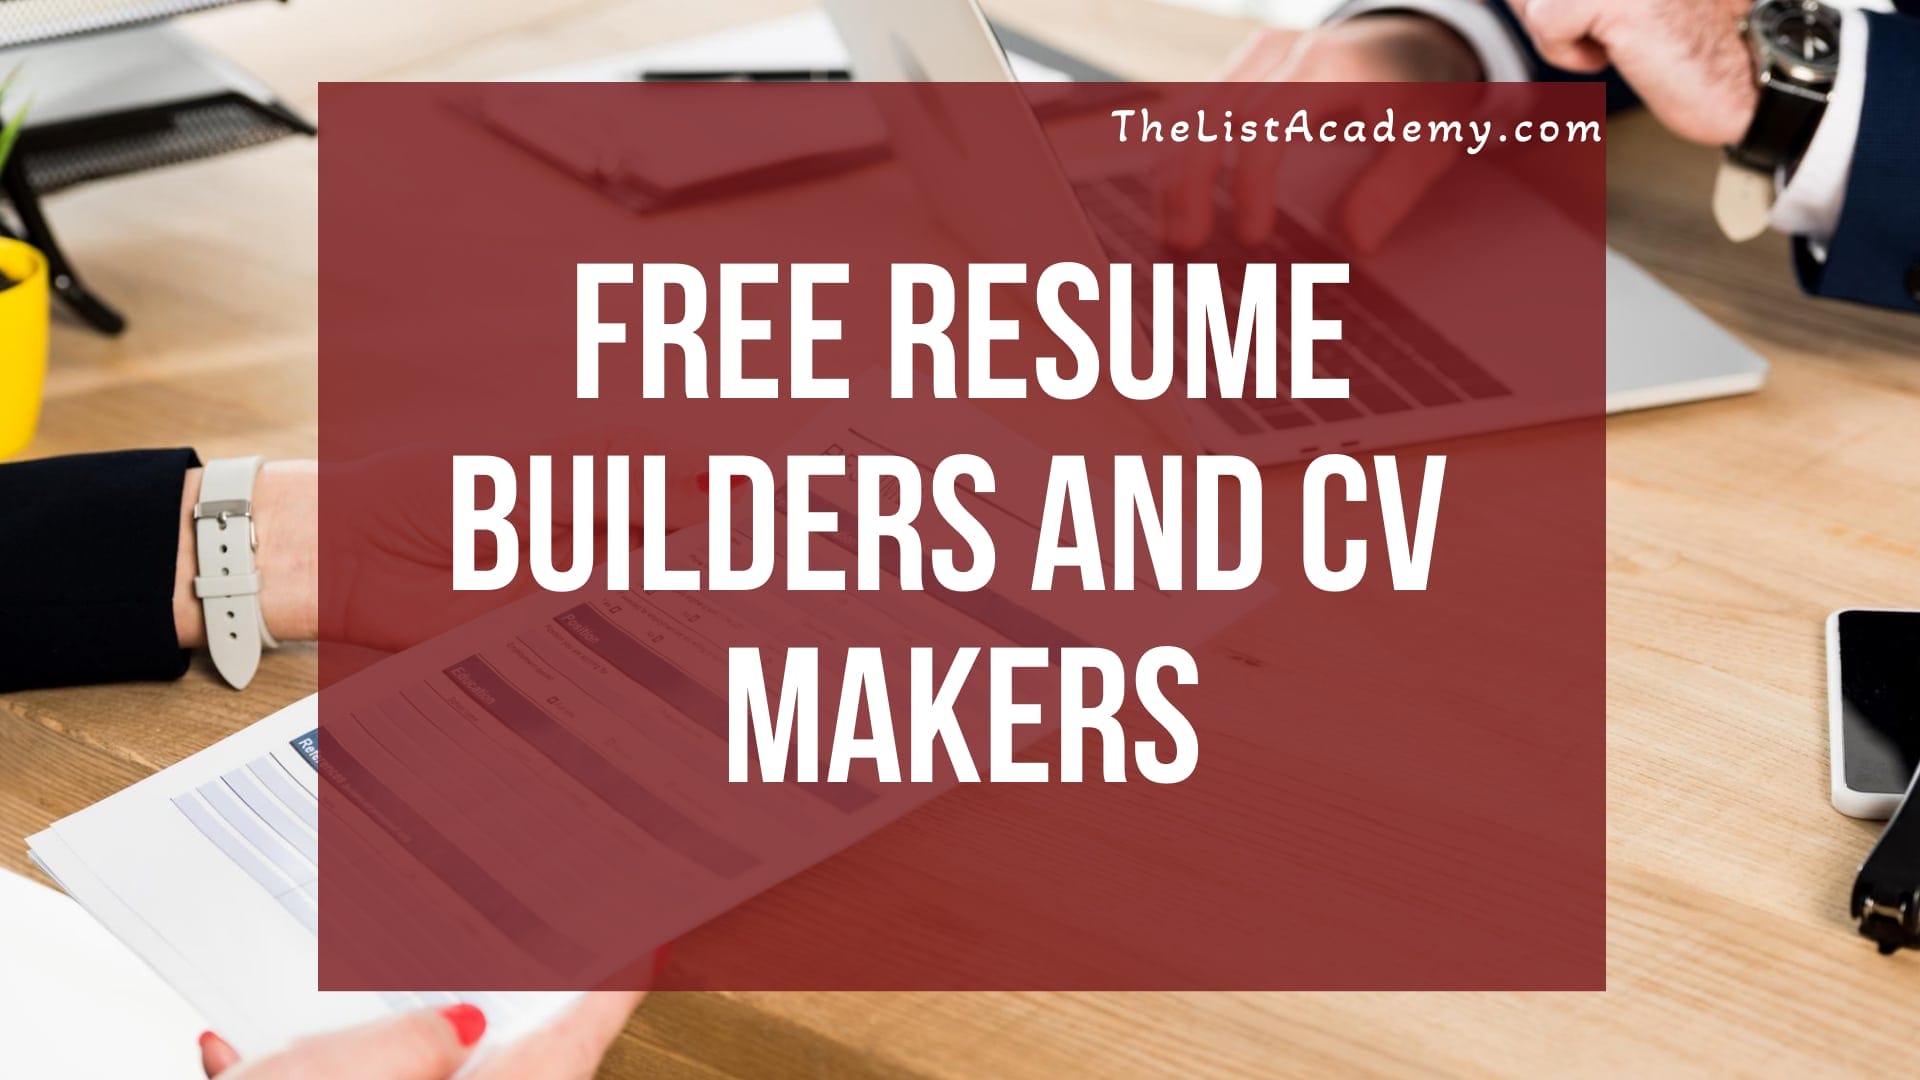 Cover Image For List : 13 Sites To Build Resume For Free. Free Resume Builders And Cv Makers